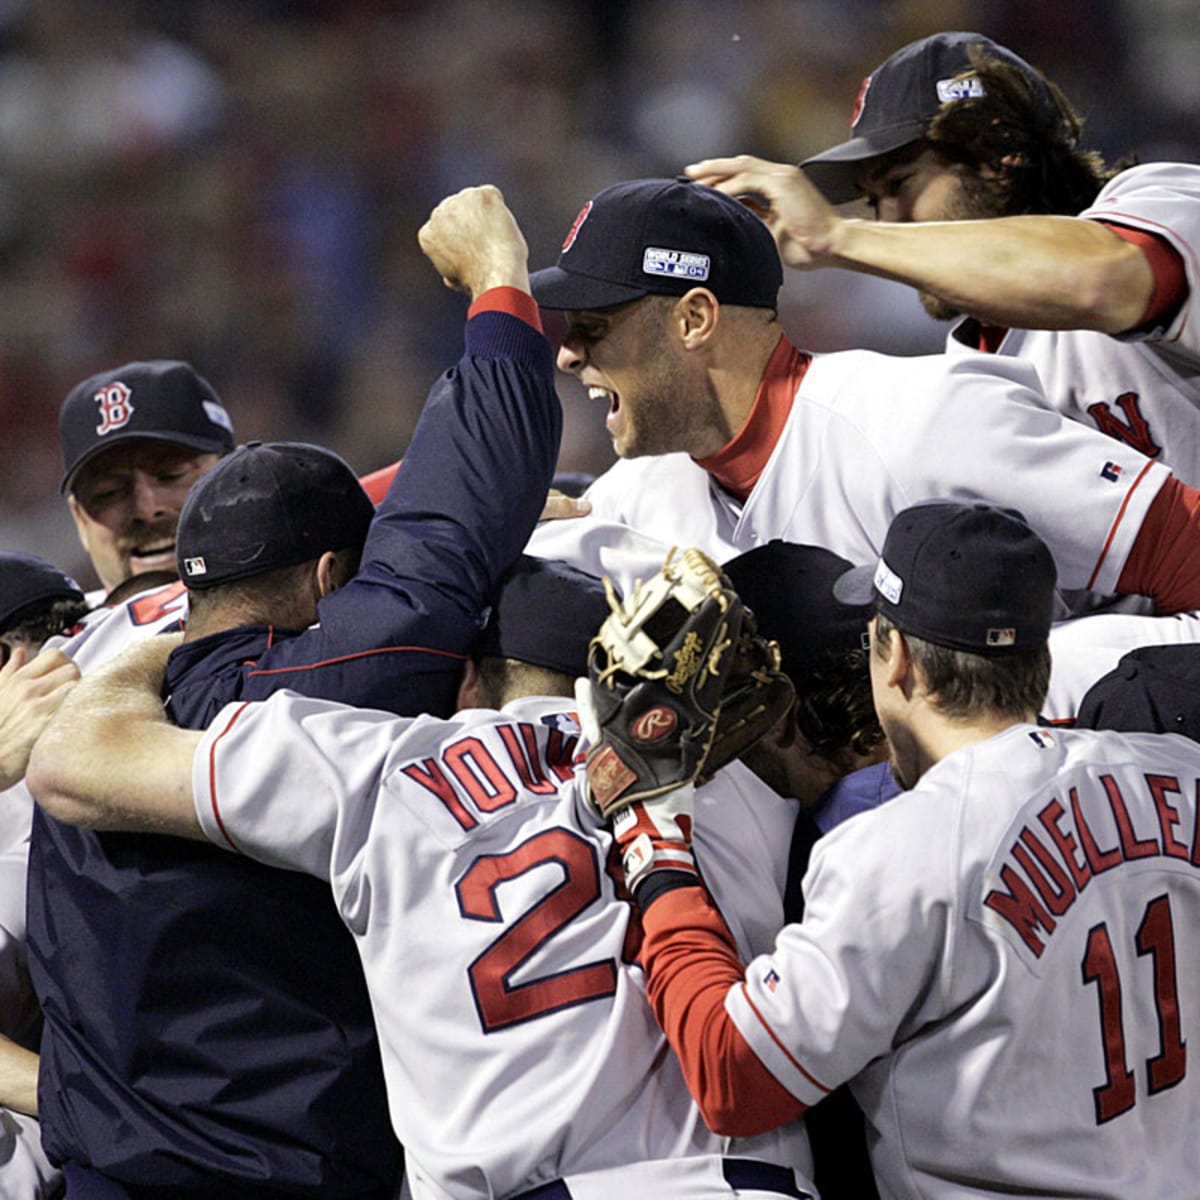 Red Sox: Keith Foulke reflects on 2004 World Series championship